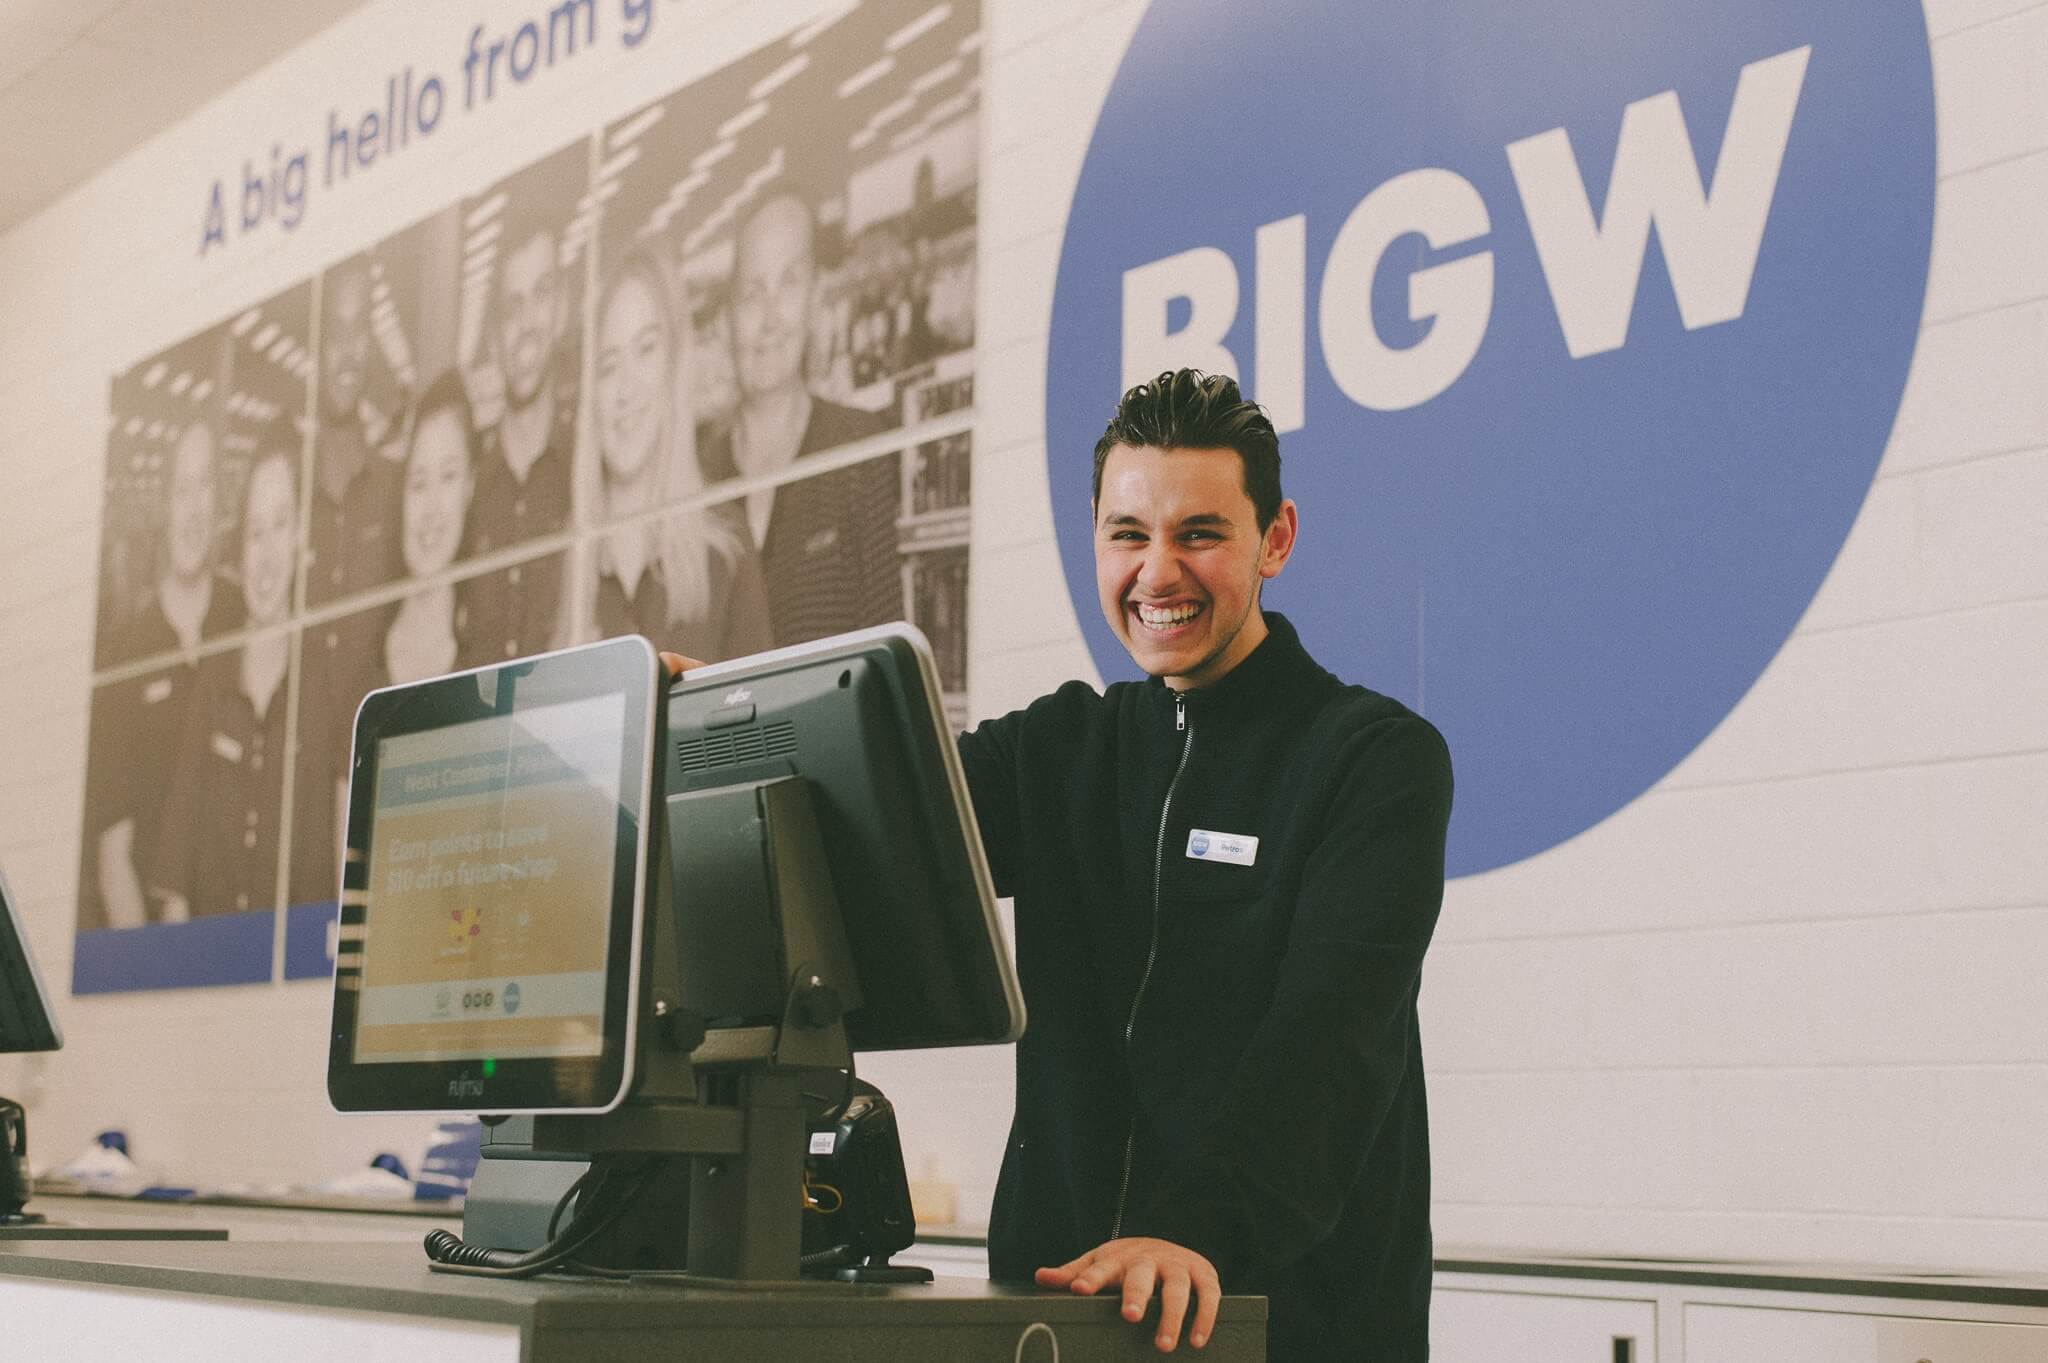 Petros standing at work in front of Big W sign at a cash register